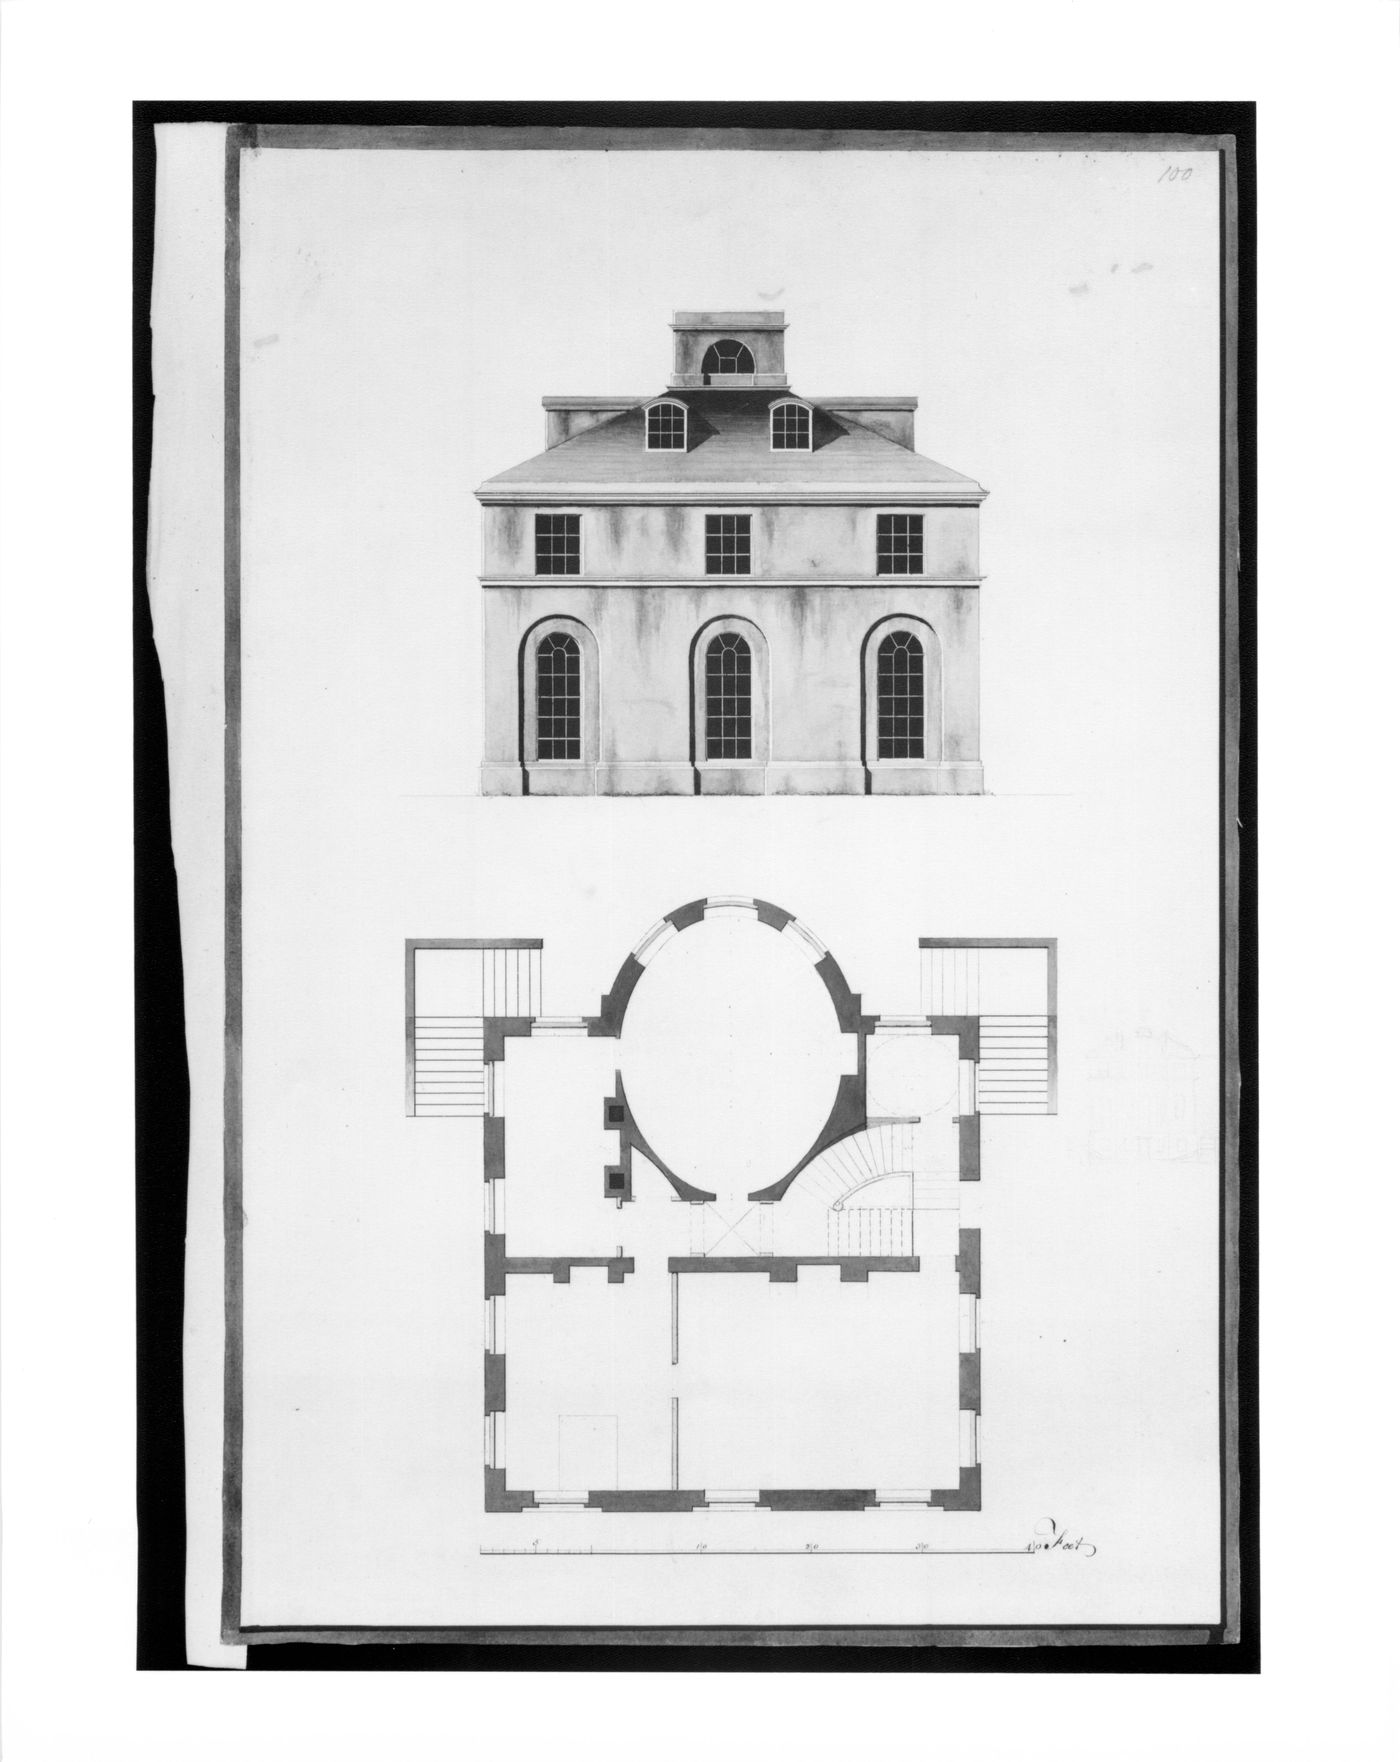 Design for a house - side elevation and plan